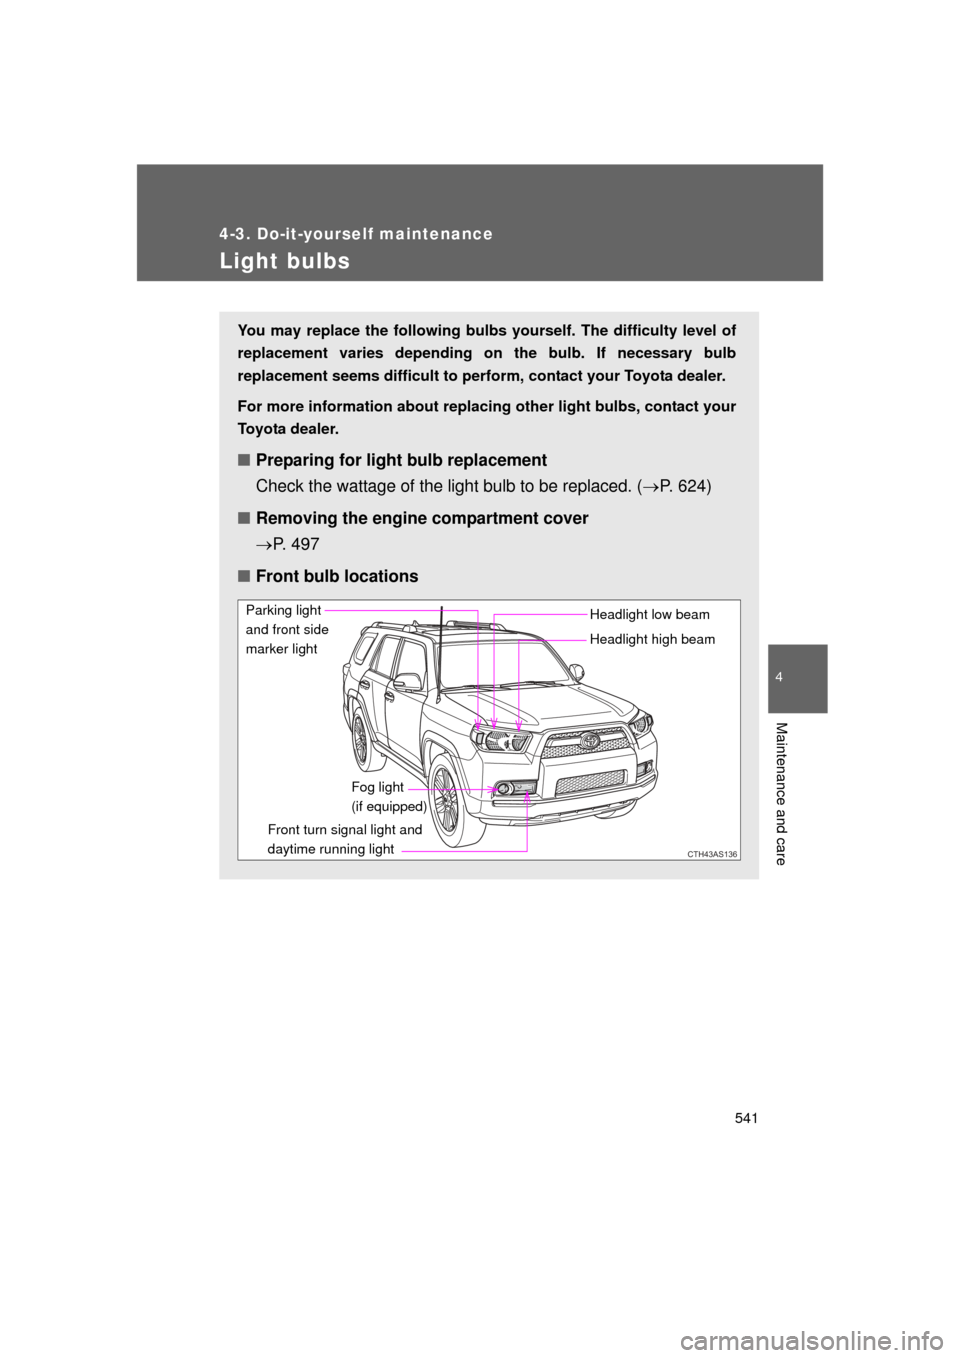 TOYOTA 4RUNNER 2011 N280 / 5.G Owners Manual 541
4-3. Do-it-yourself maintenance
4
Maintenance and care
4RUNNER_U
Light bulbs
You may replace the following bulbs yourself. The difficulty level of
replacement varies depending on the bulb. If nece